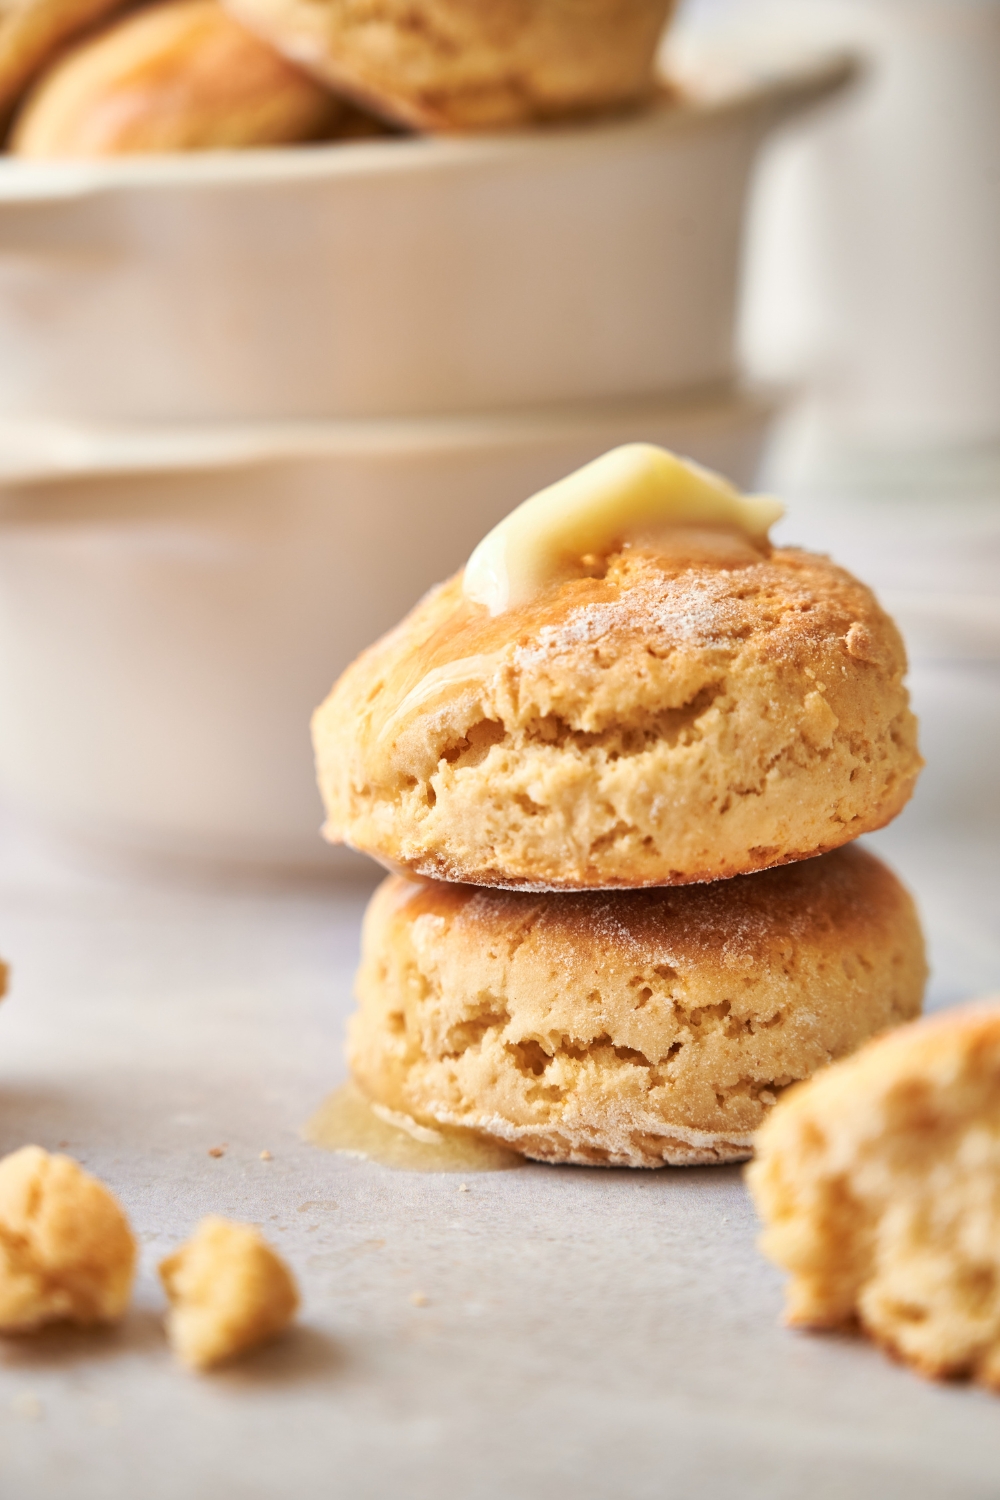 Two biscuits are stacked on top of each other. The top biscuit has a dollop of butter on top.